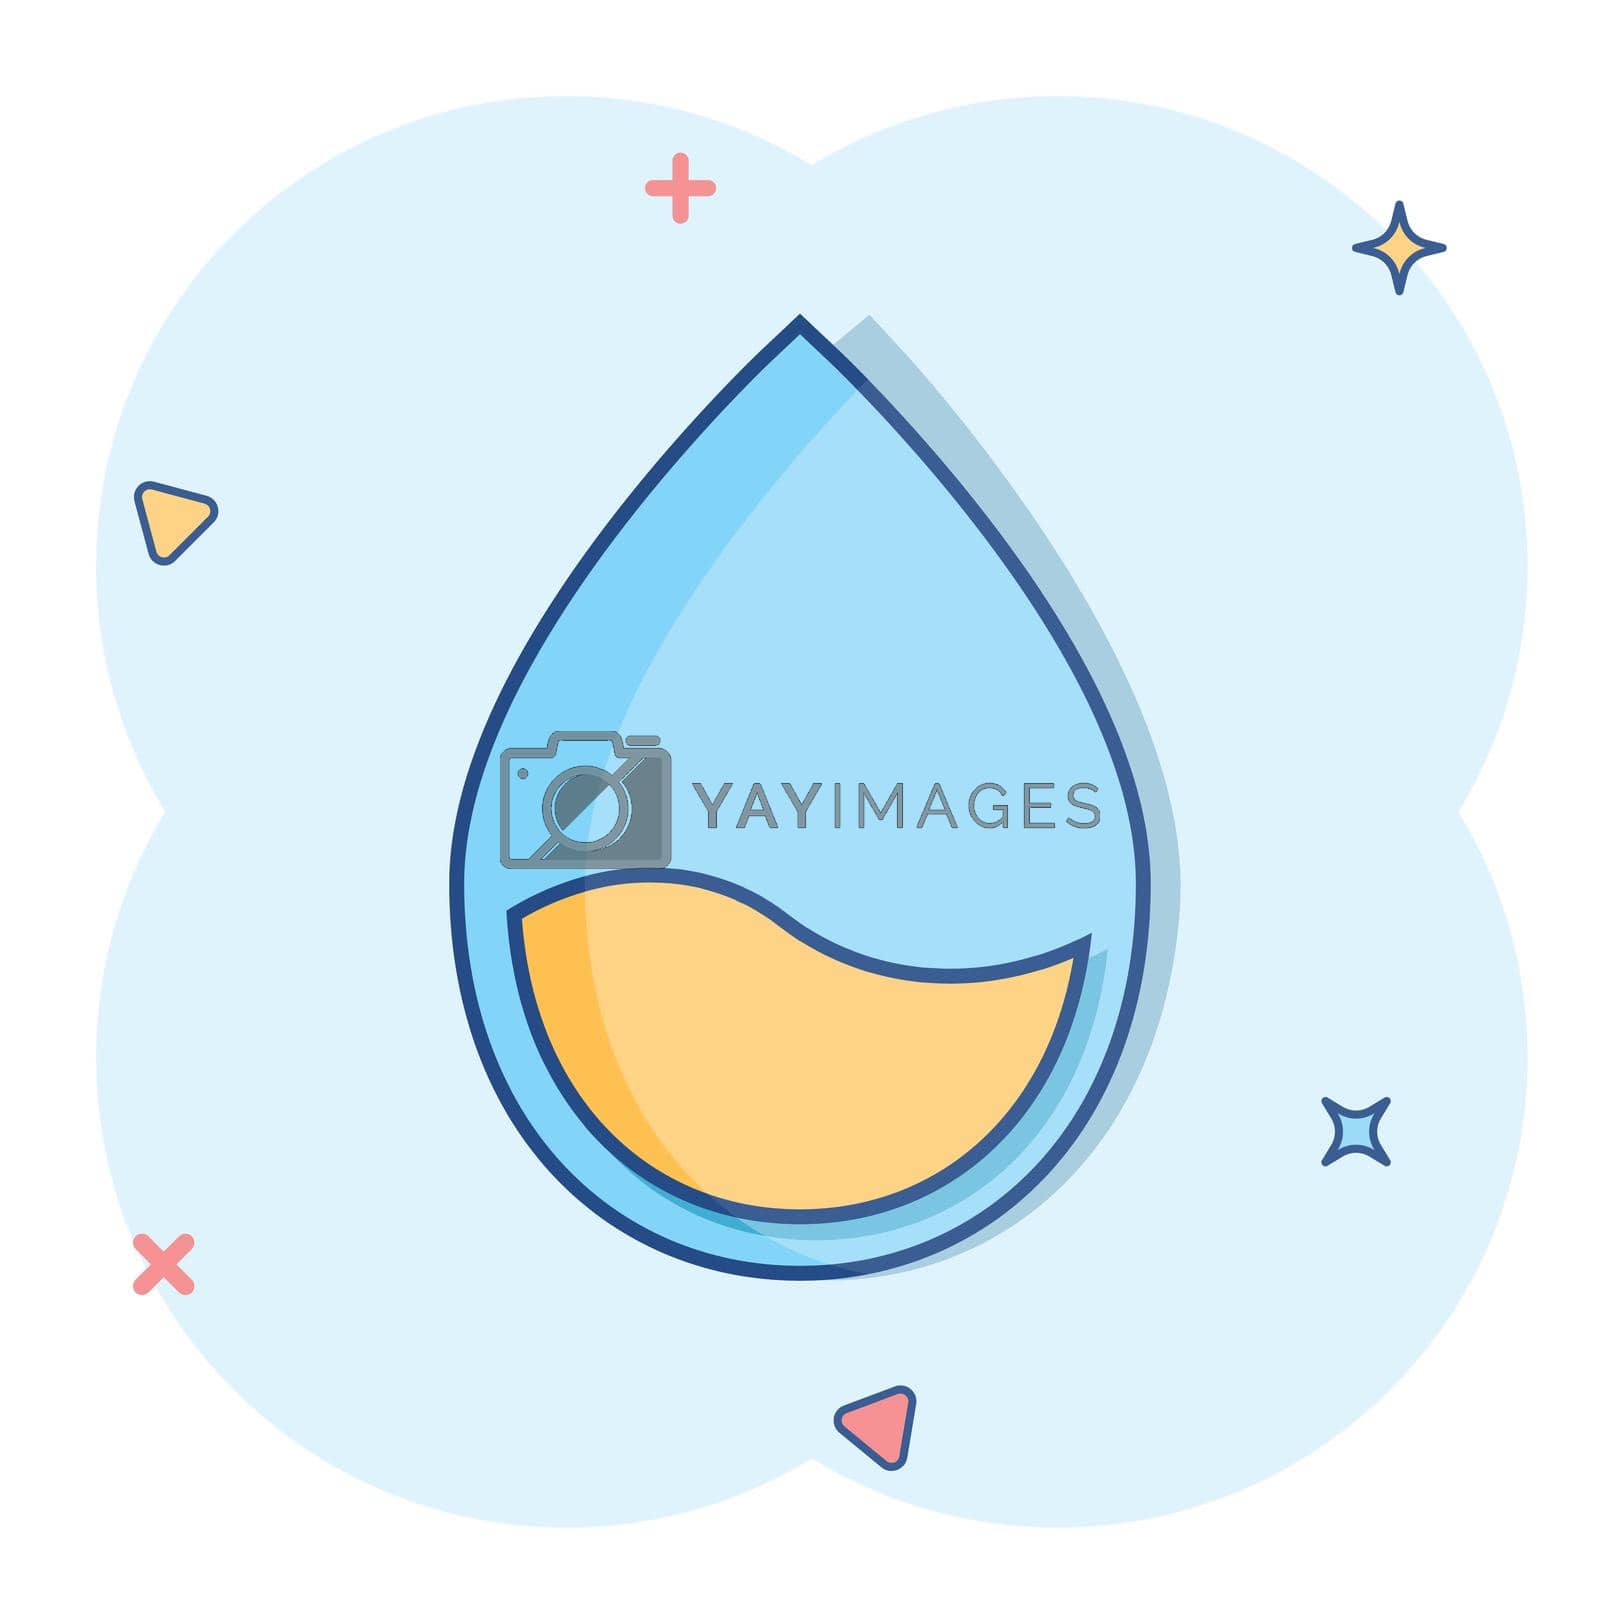 Royalty free image of Water drop icon in comic style. Raindrop vector cartoon illustration pictogram. Droplet water blob business concept splash effect. by LysenkoA